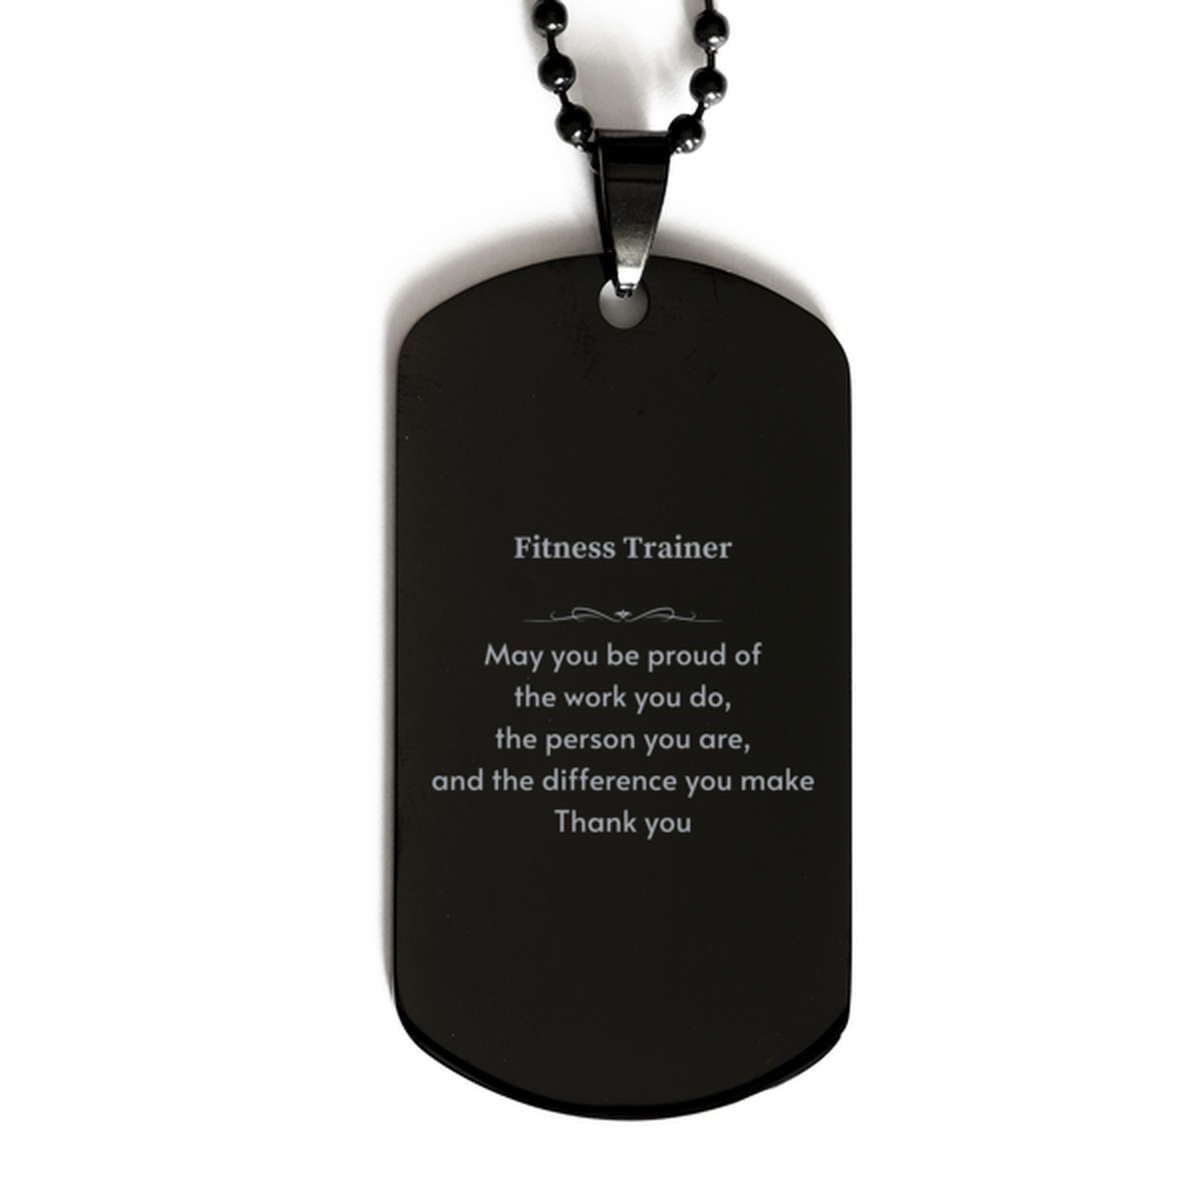 Heartwarming Black Dog Tag Retirement Coworkers Gifts for Fitness Trainer, Fitness Trainer May You be proud of the work you do, the person you are Gifts for Boss Men Women Friends